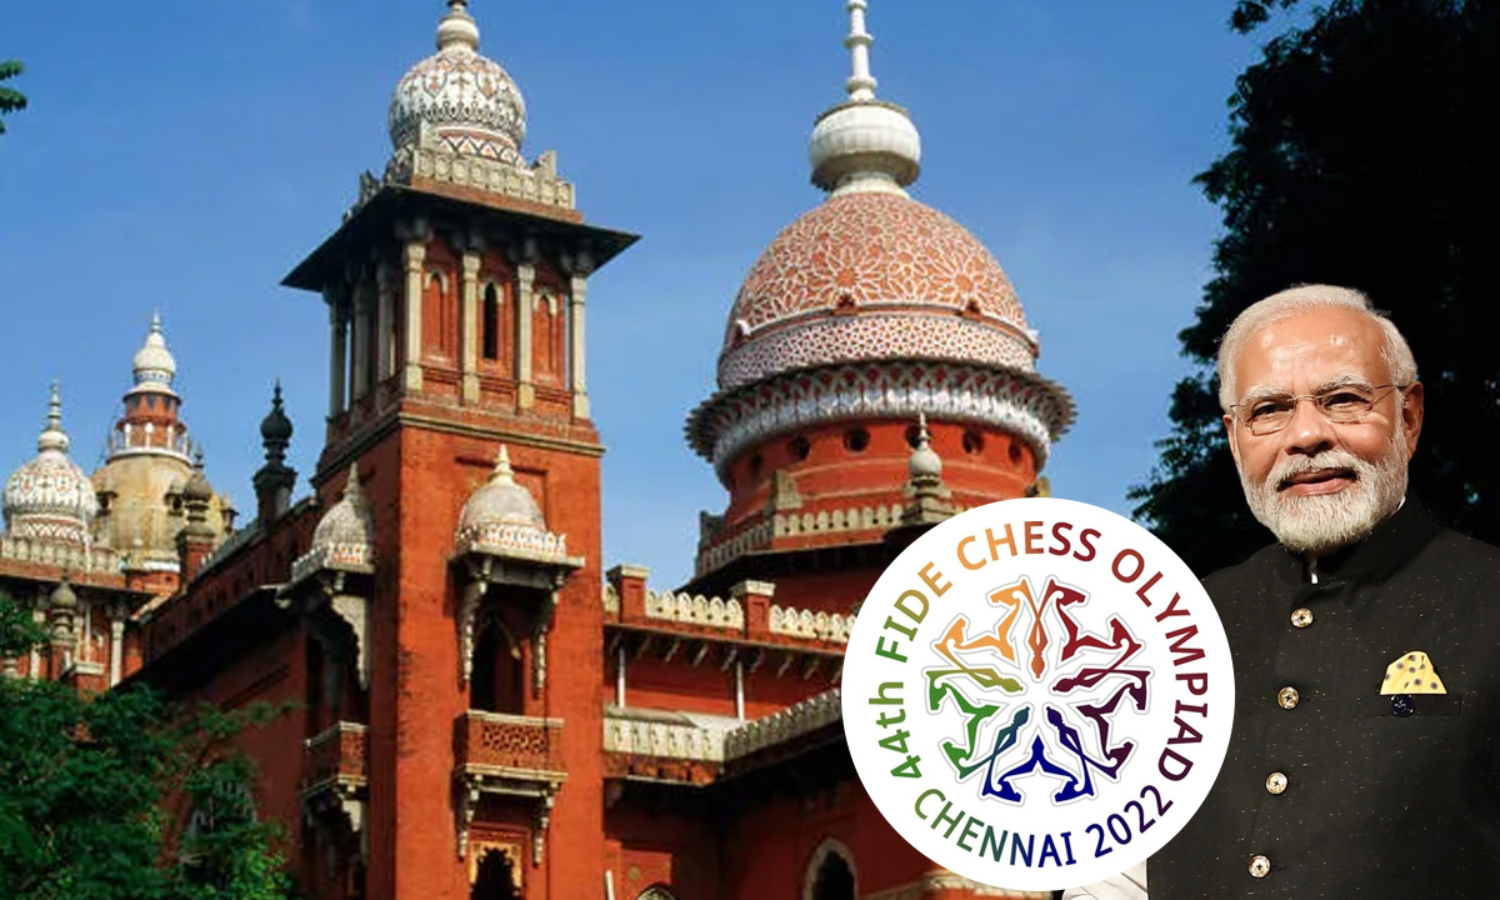 India Officially Handed Rights To Host World Chess Olympiad 2022